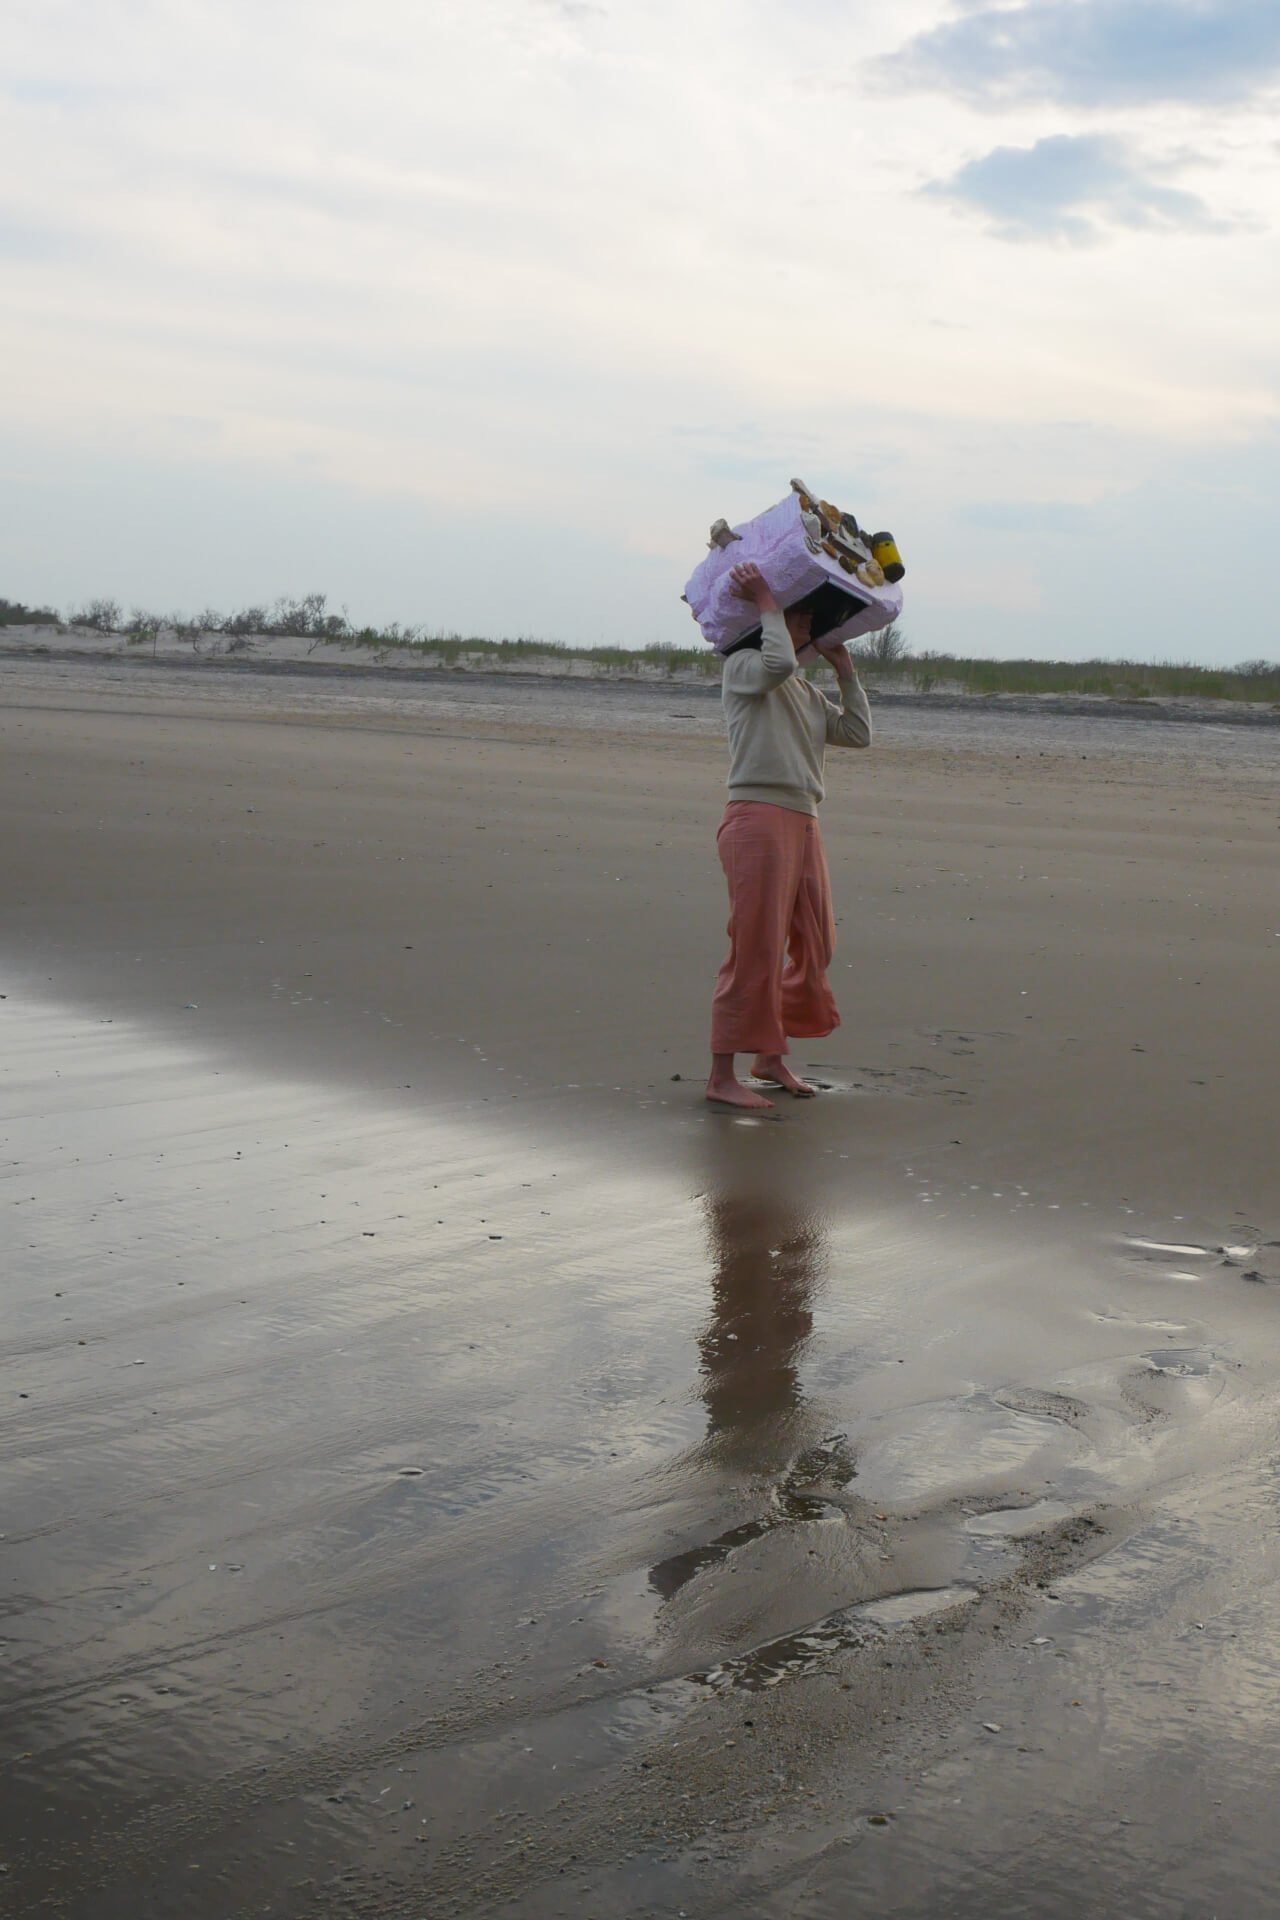 A person standing on the beach wearing a Plastic Dance helmet dancing.